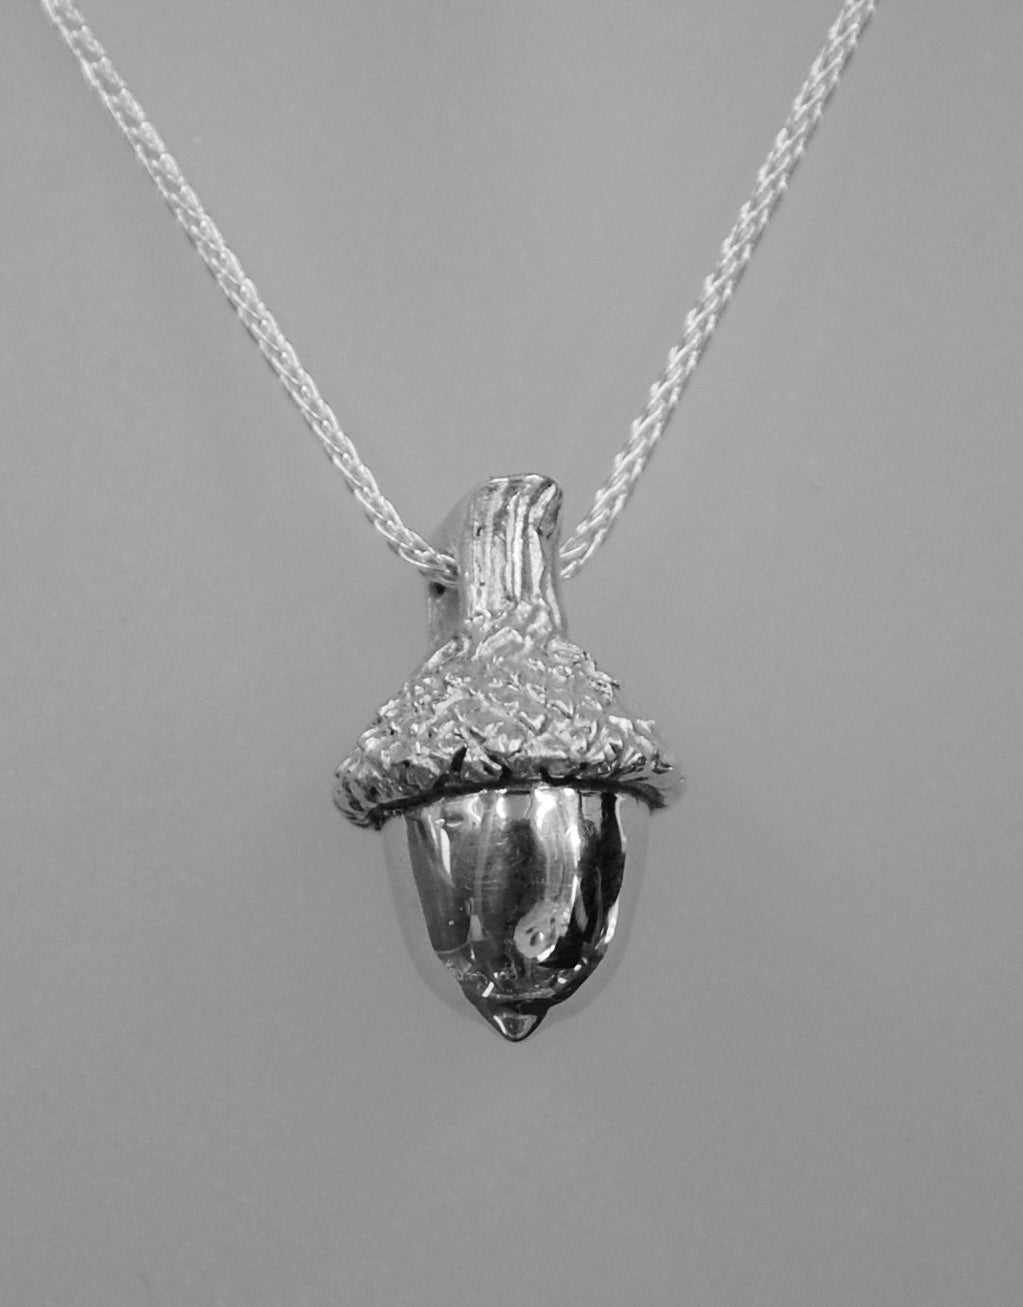 May Contain Nuts - Solid Sterling silver acorn pendant/necklace